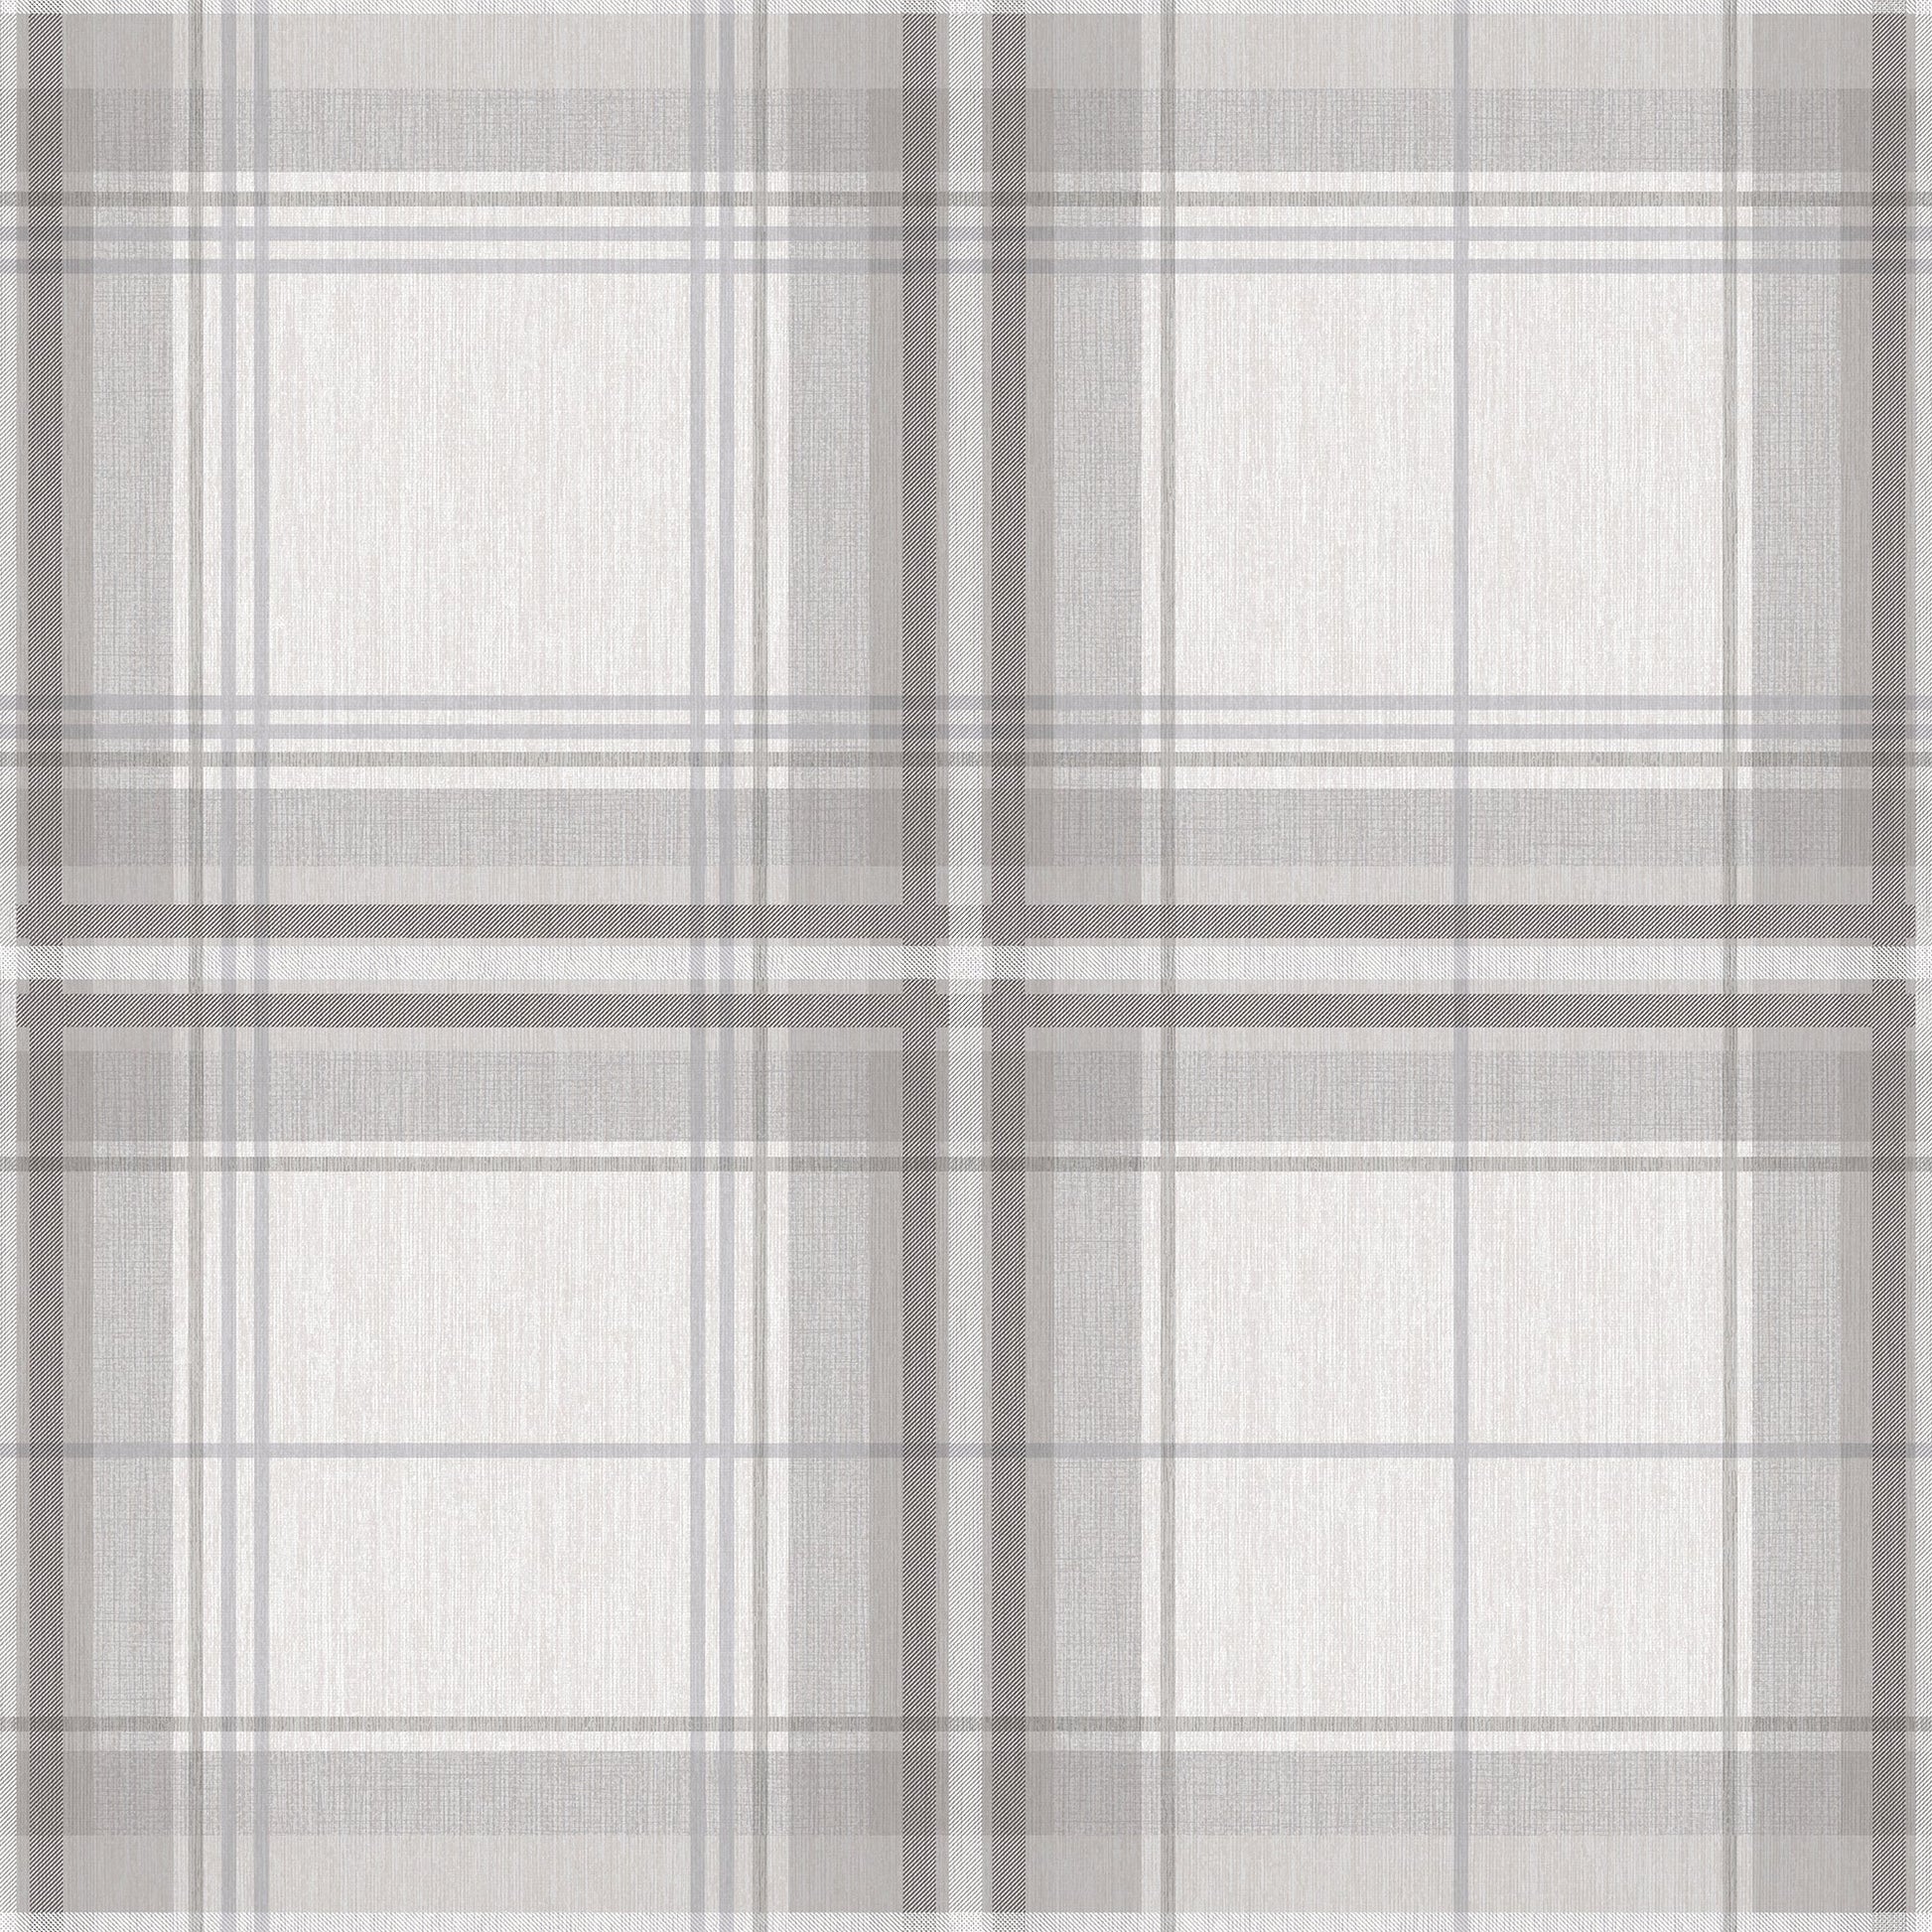 Woven Check Wallpaper 903102 by Arthouse